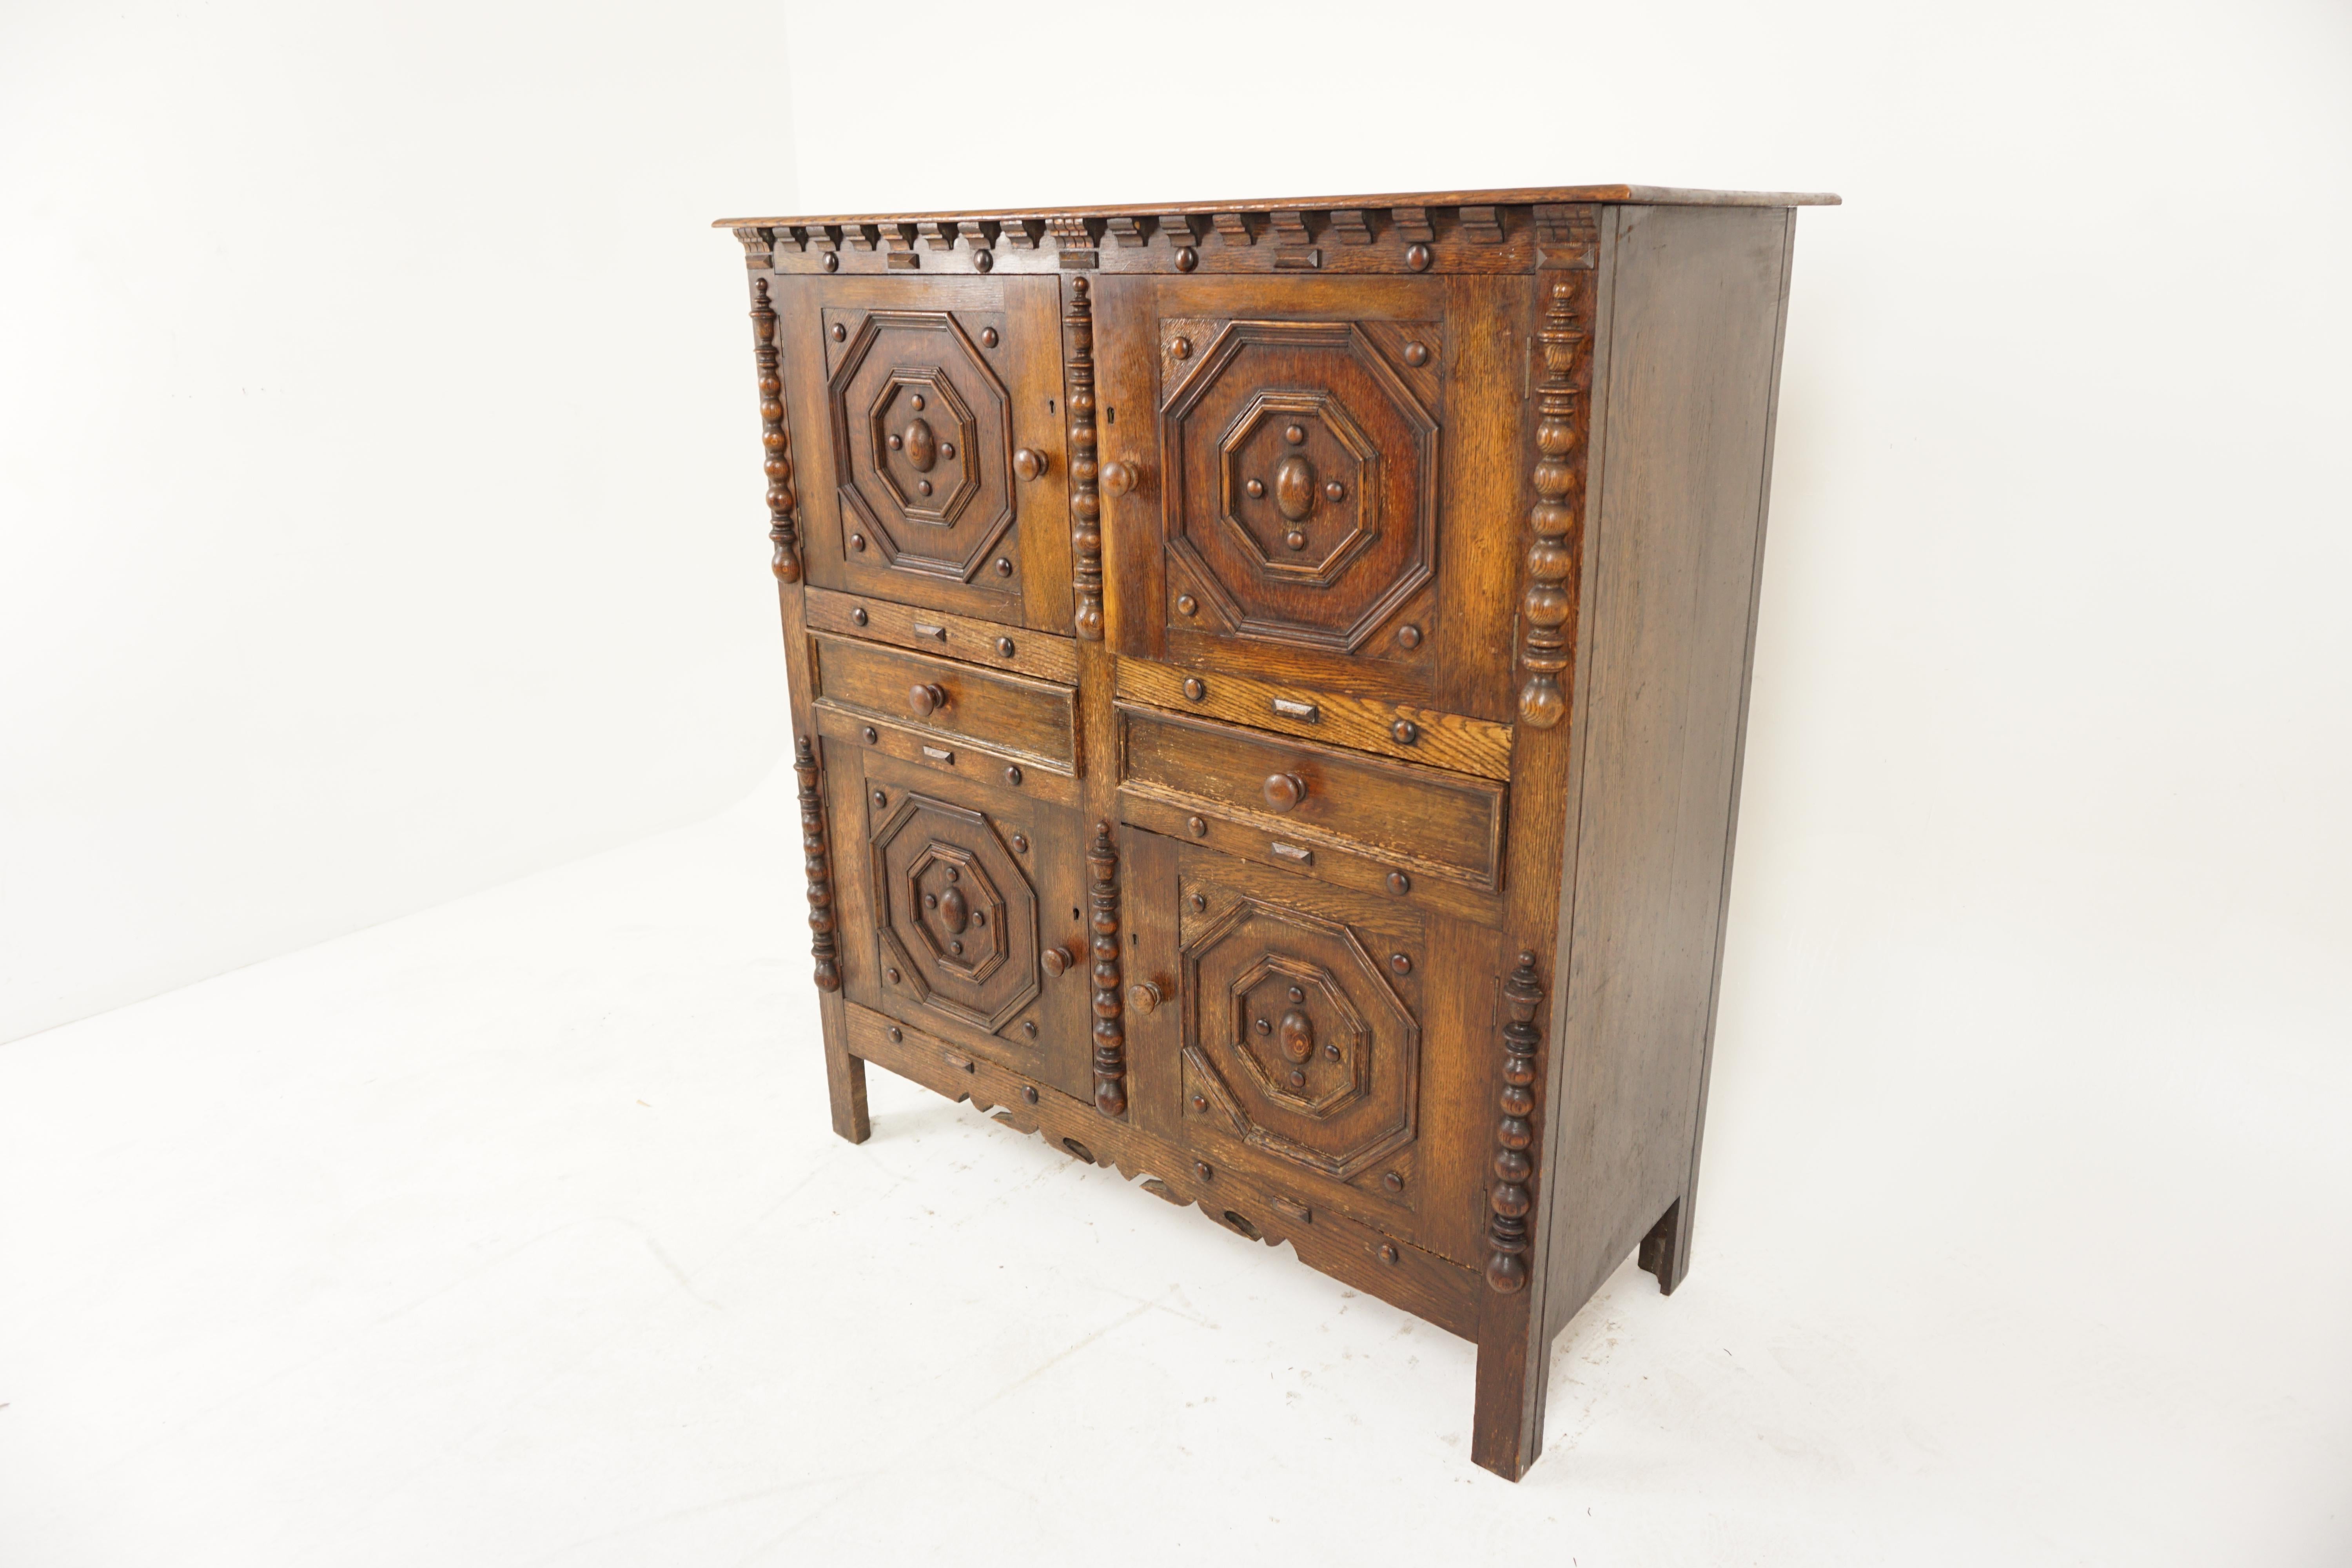 Antique Victorian Heavily Carved Oak Hall Cupboard 4 Door, Scotland 1890, H974

Solid Oak
Original finish
Rectangular top
Pair of geometric carved raised panel doors on top
Opens to reveal single shelves in each side
Below pair of doveytailed